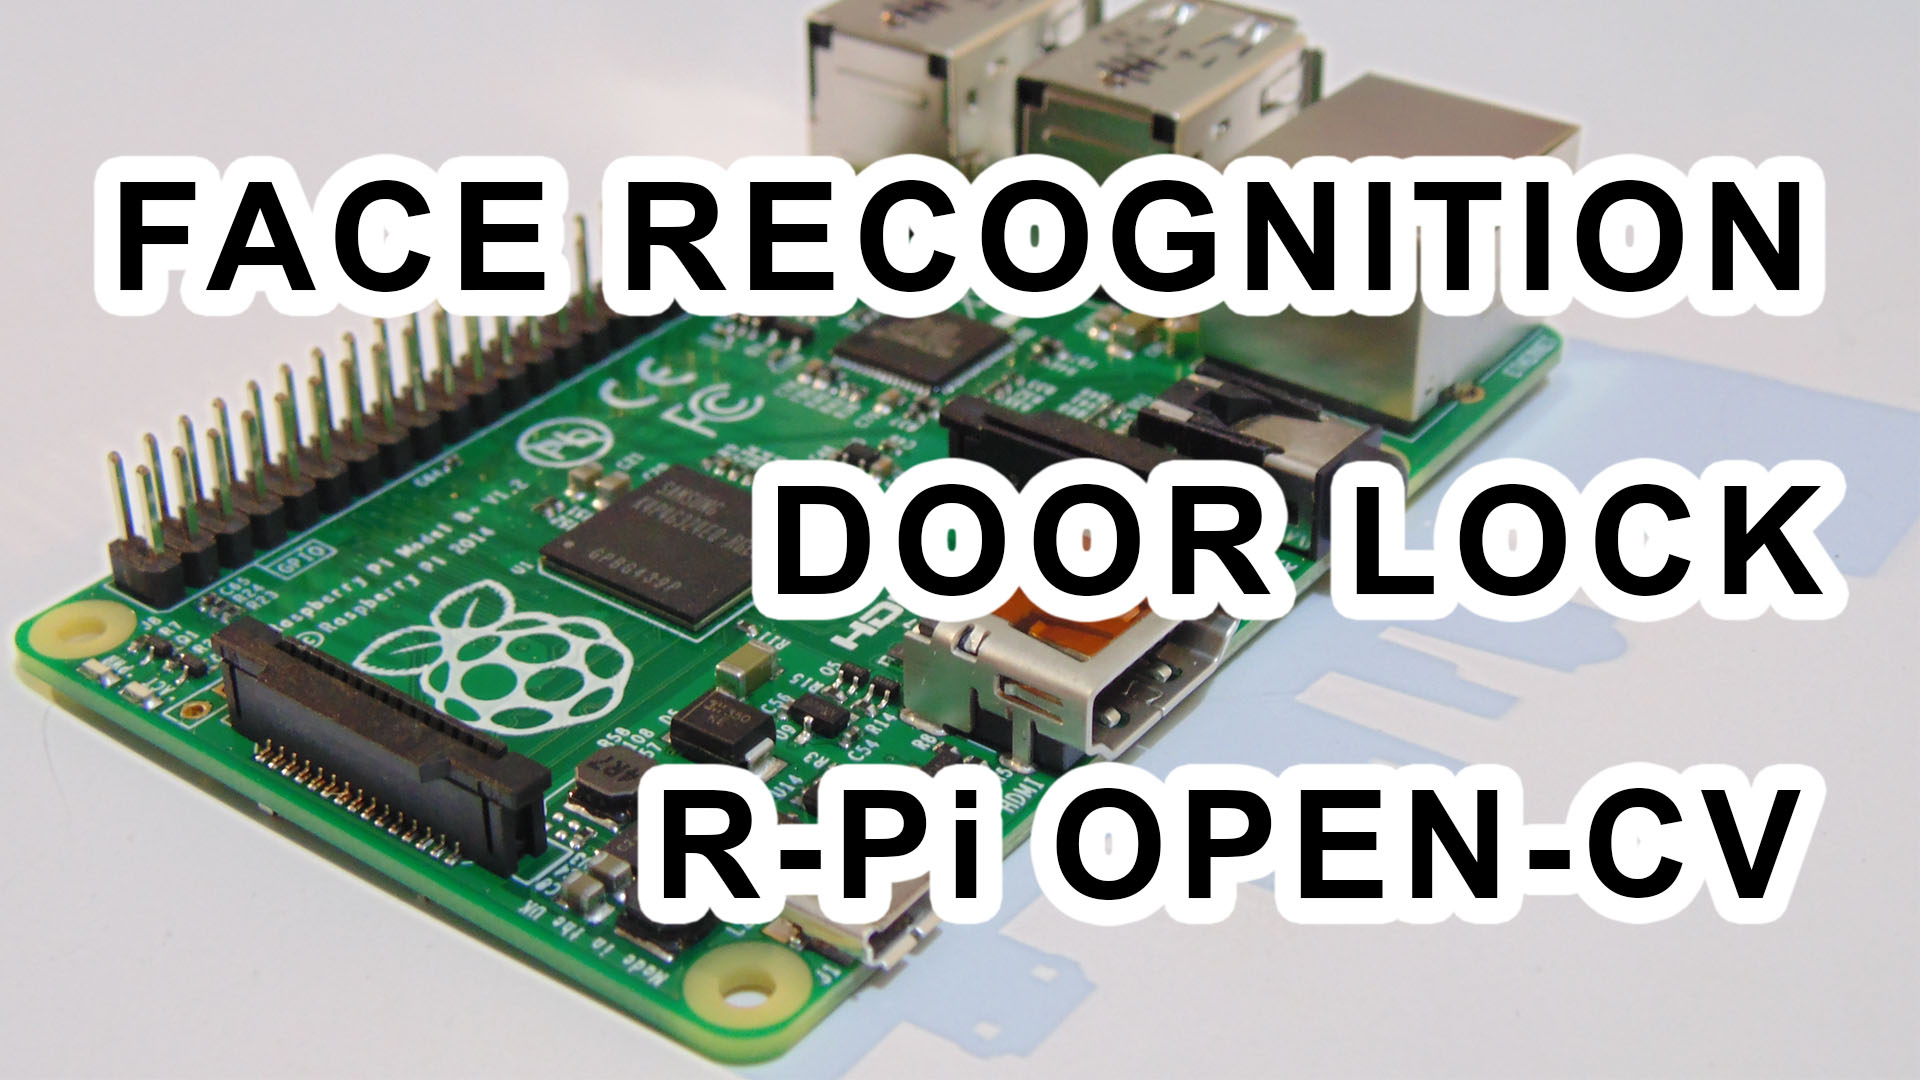 Face Recognition based Door Lock using Raspberry Pi and OpenCV